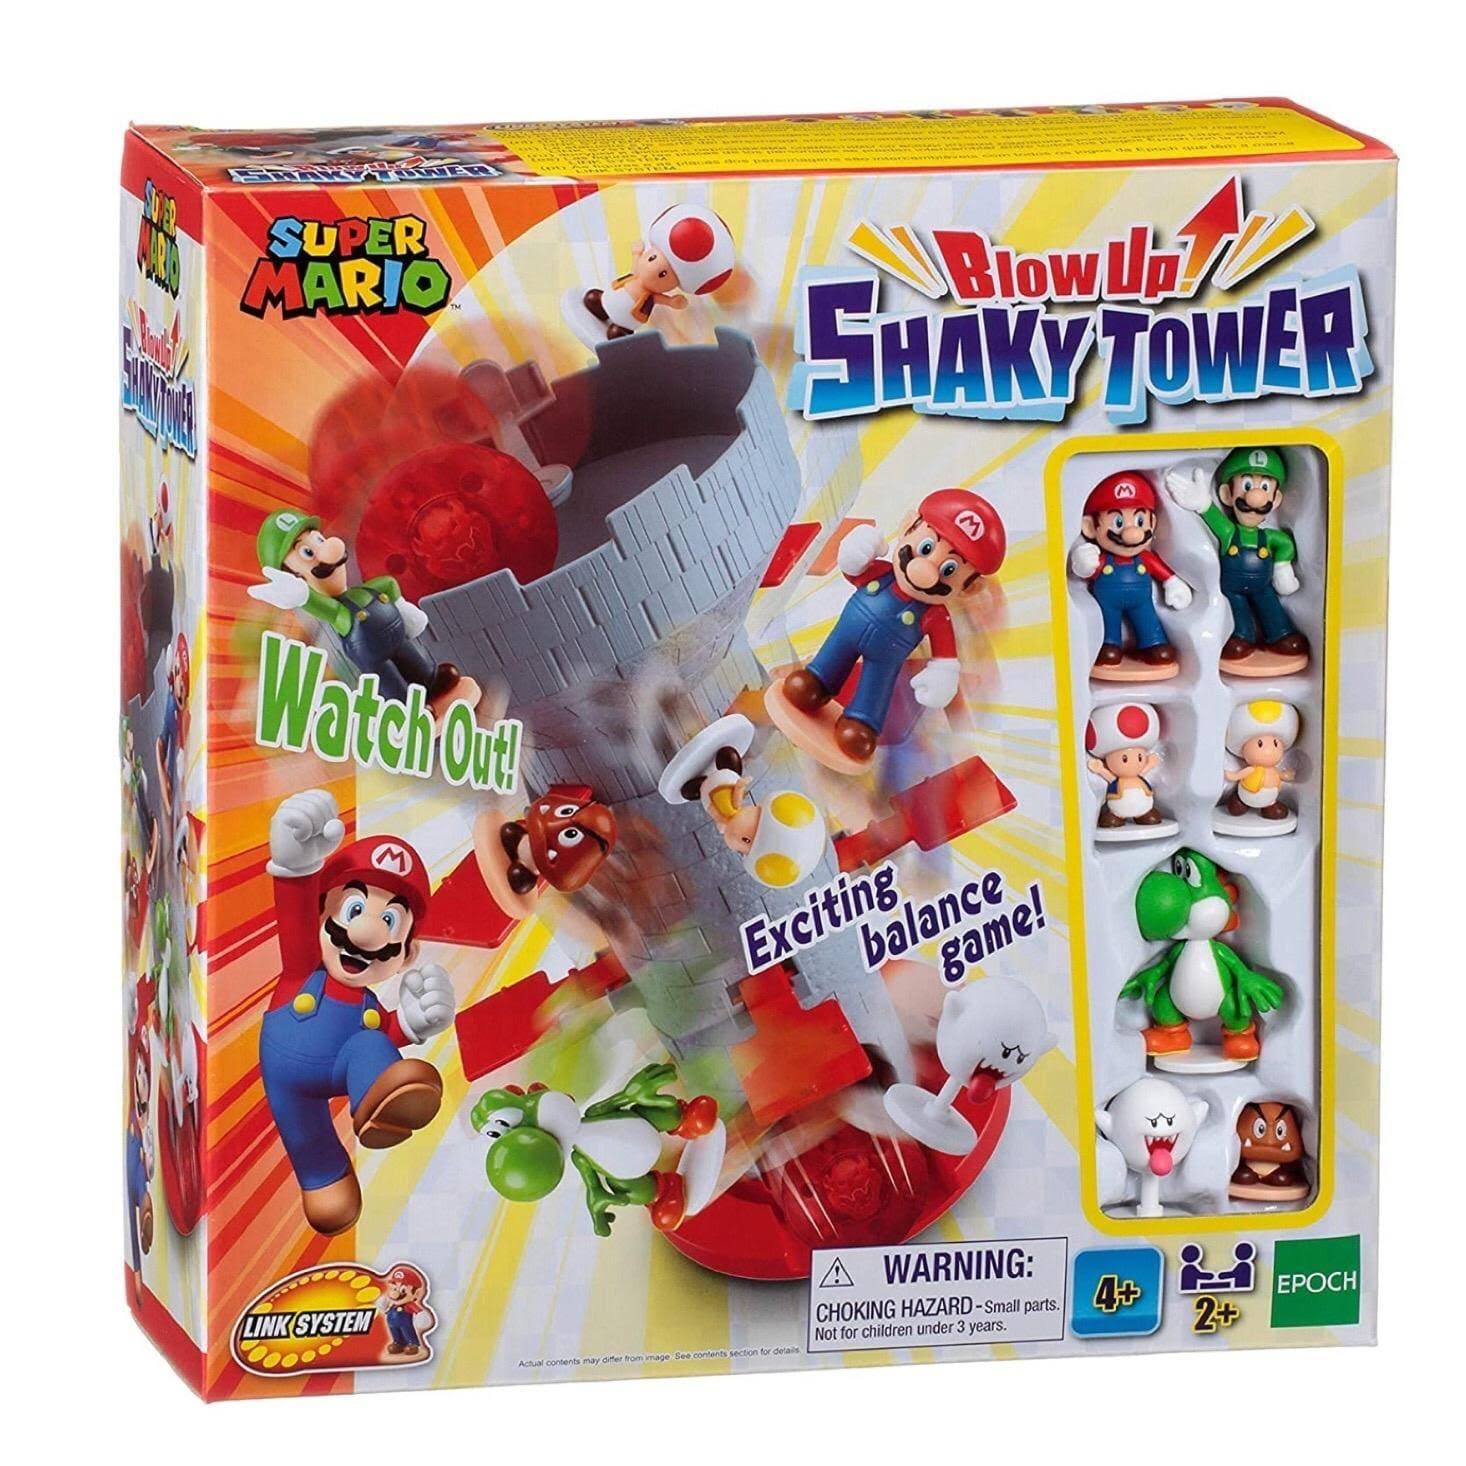 Super Mario Blow Up! Shaky Tower Tabletop Game [Epoch]